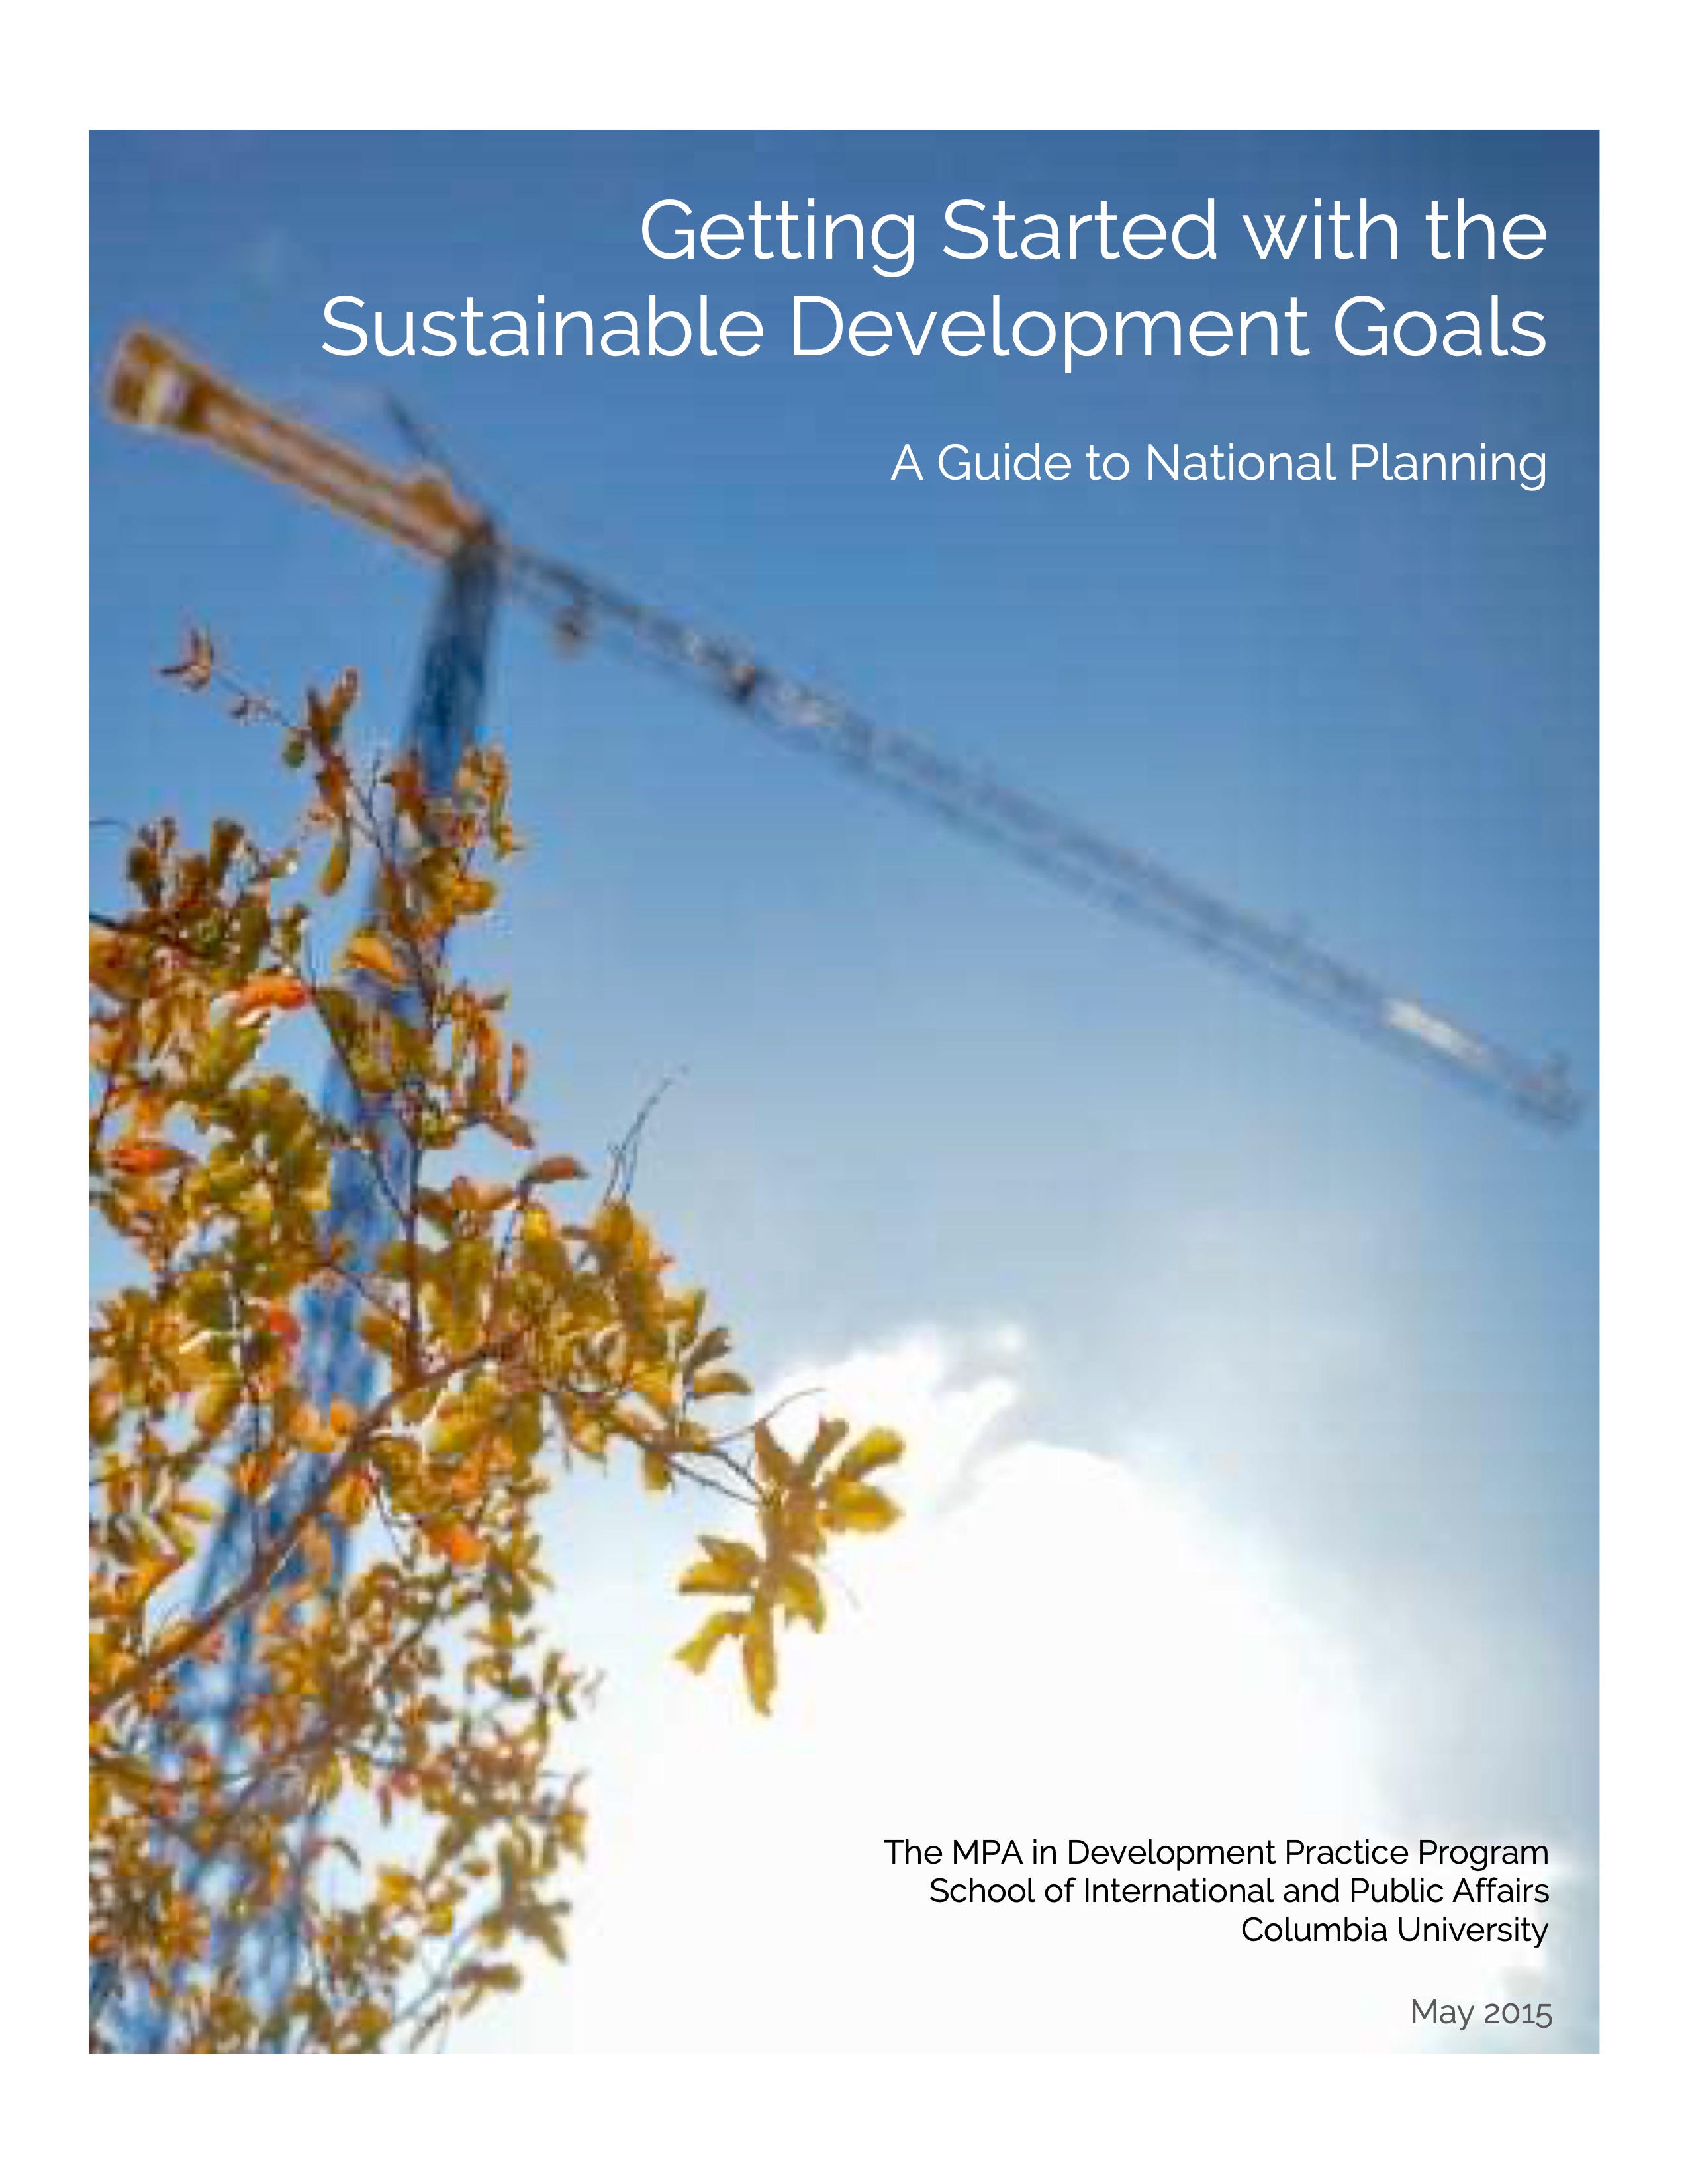 Getting Started with the Sustainable Development Goals